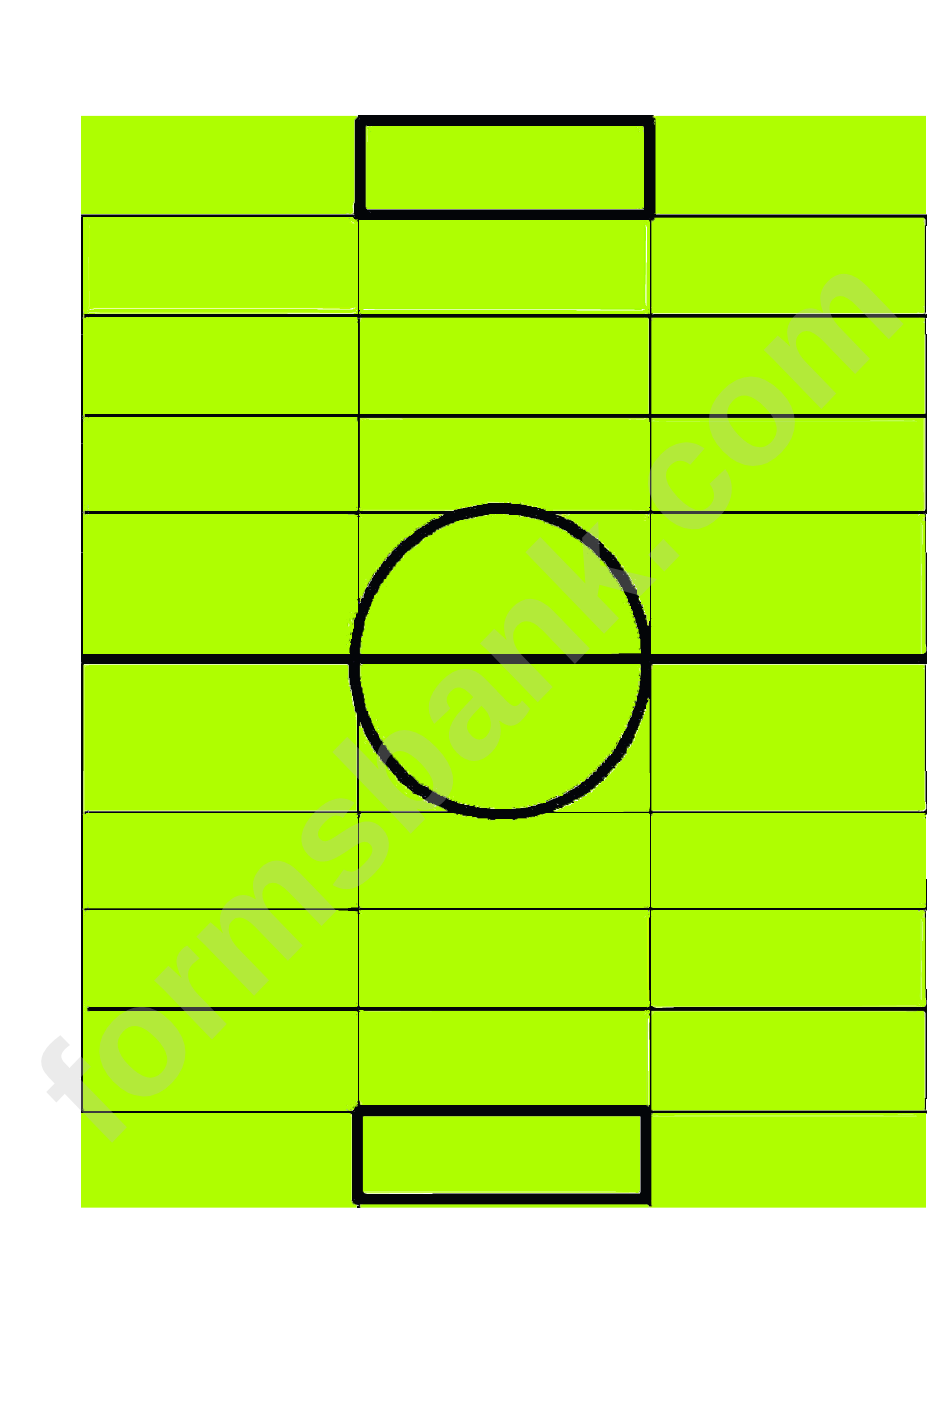 Goal Game Template With Instructions